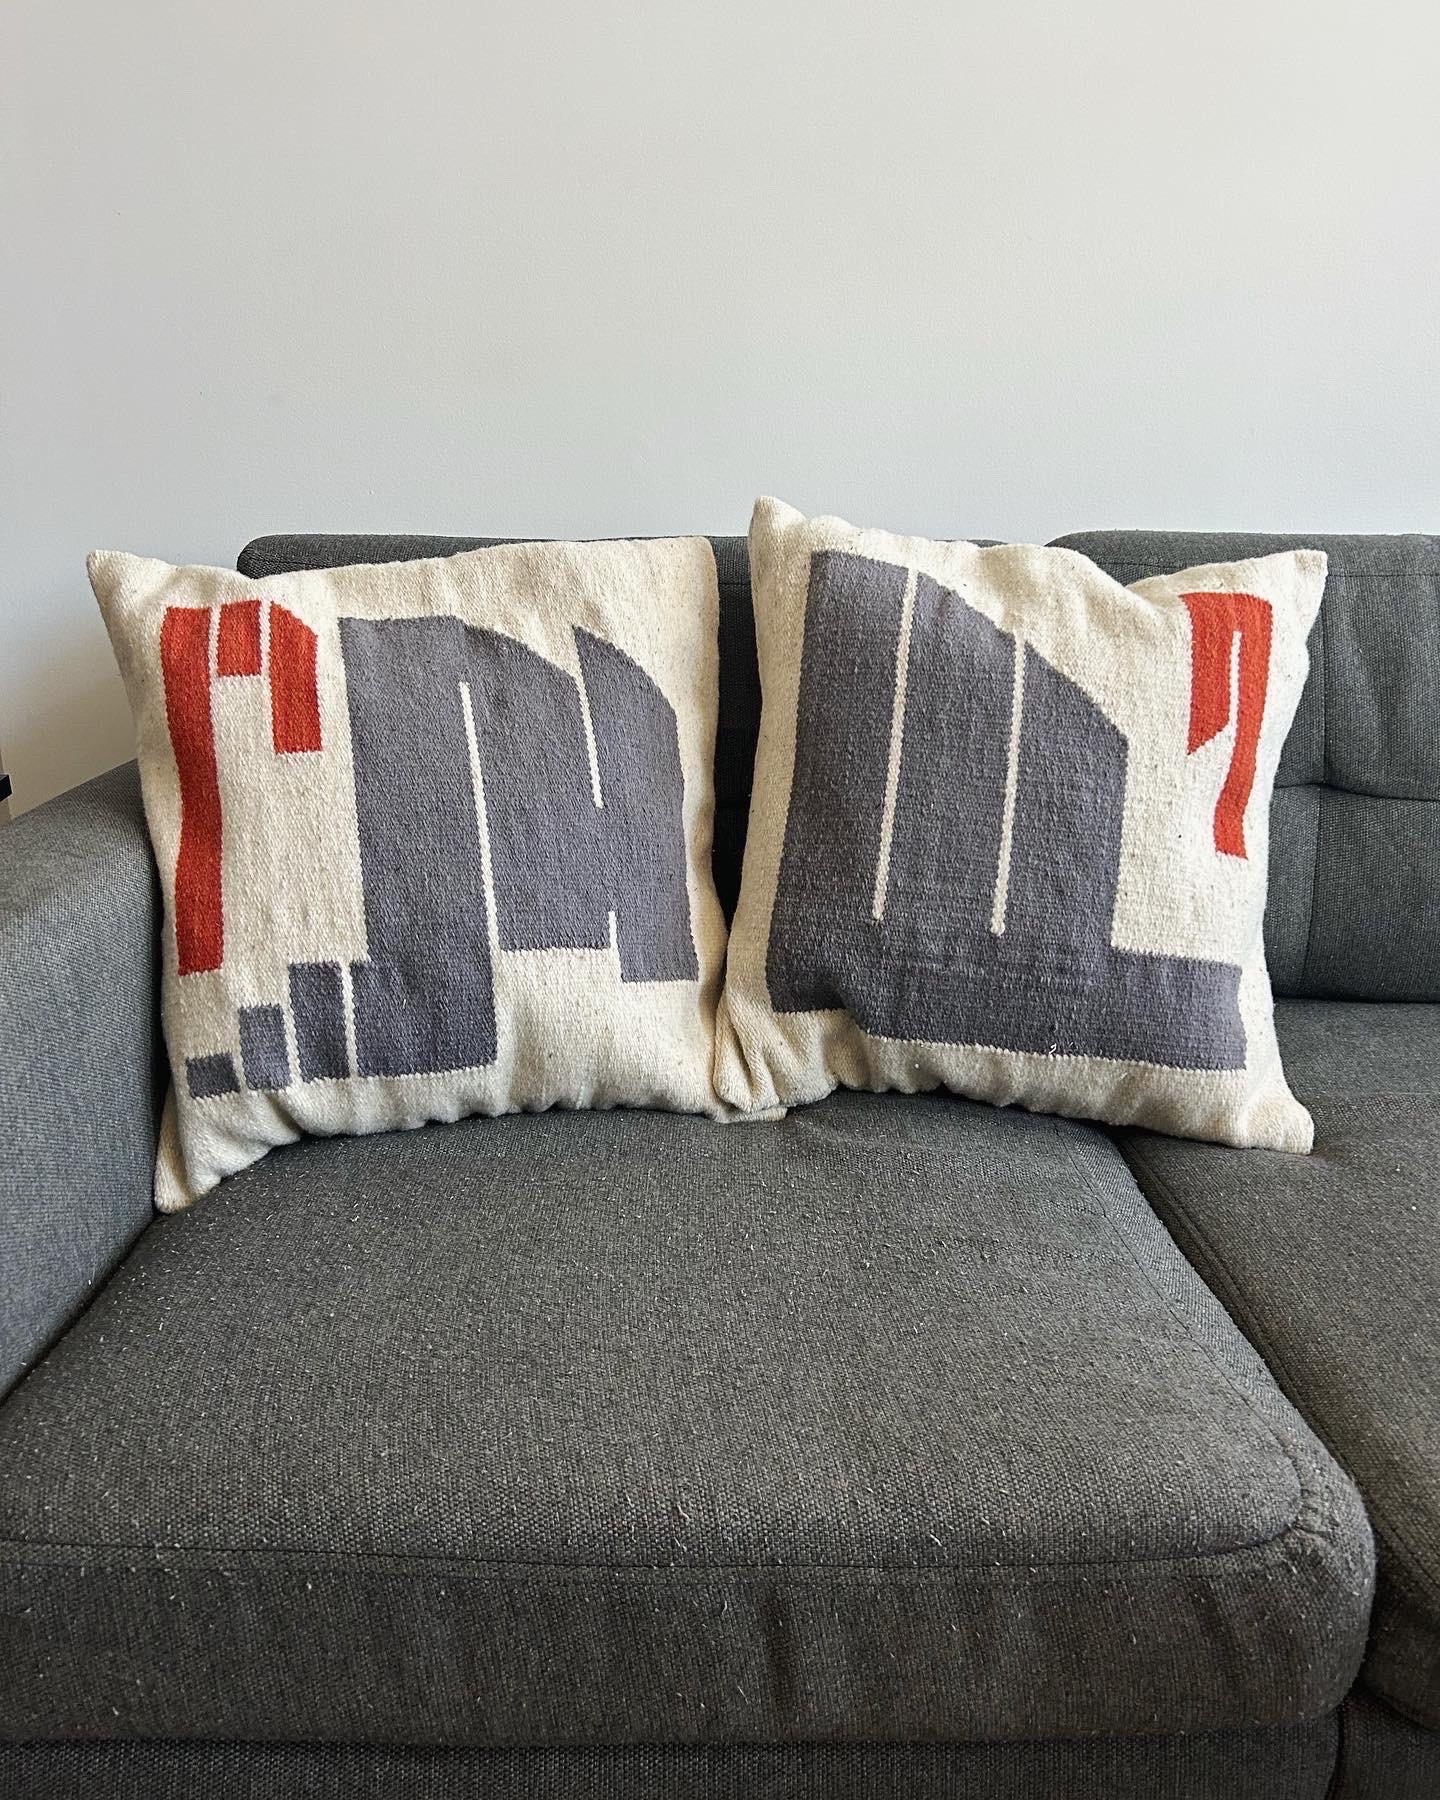 Wool Bespoke set of Handwoven Throw Pillows For Sale